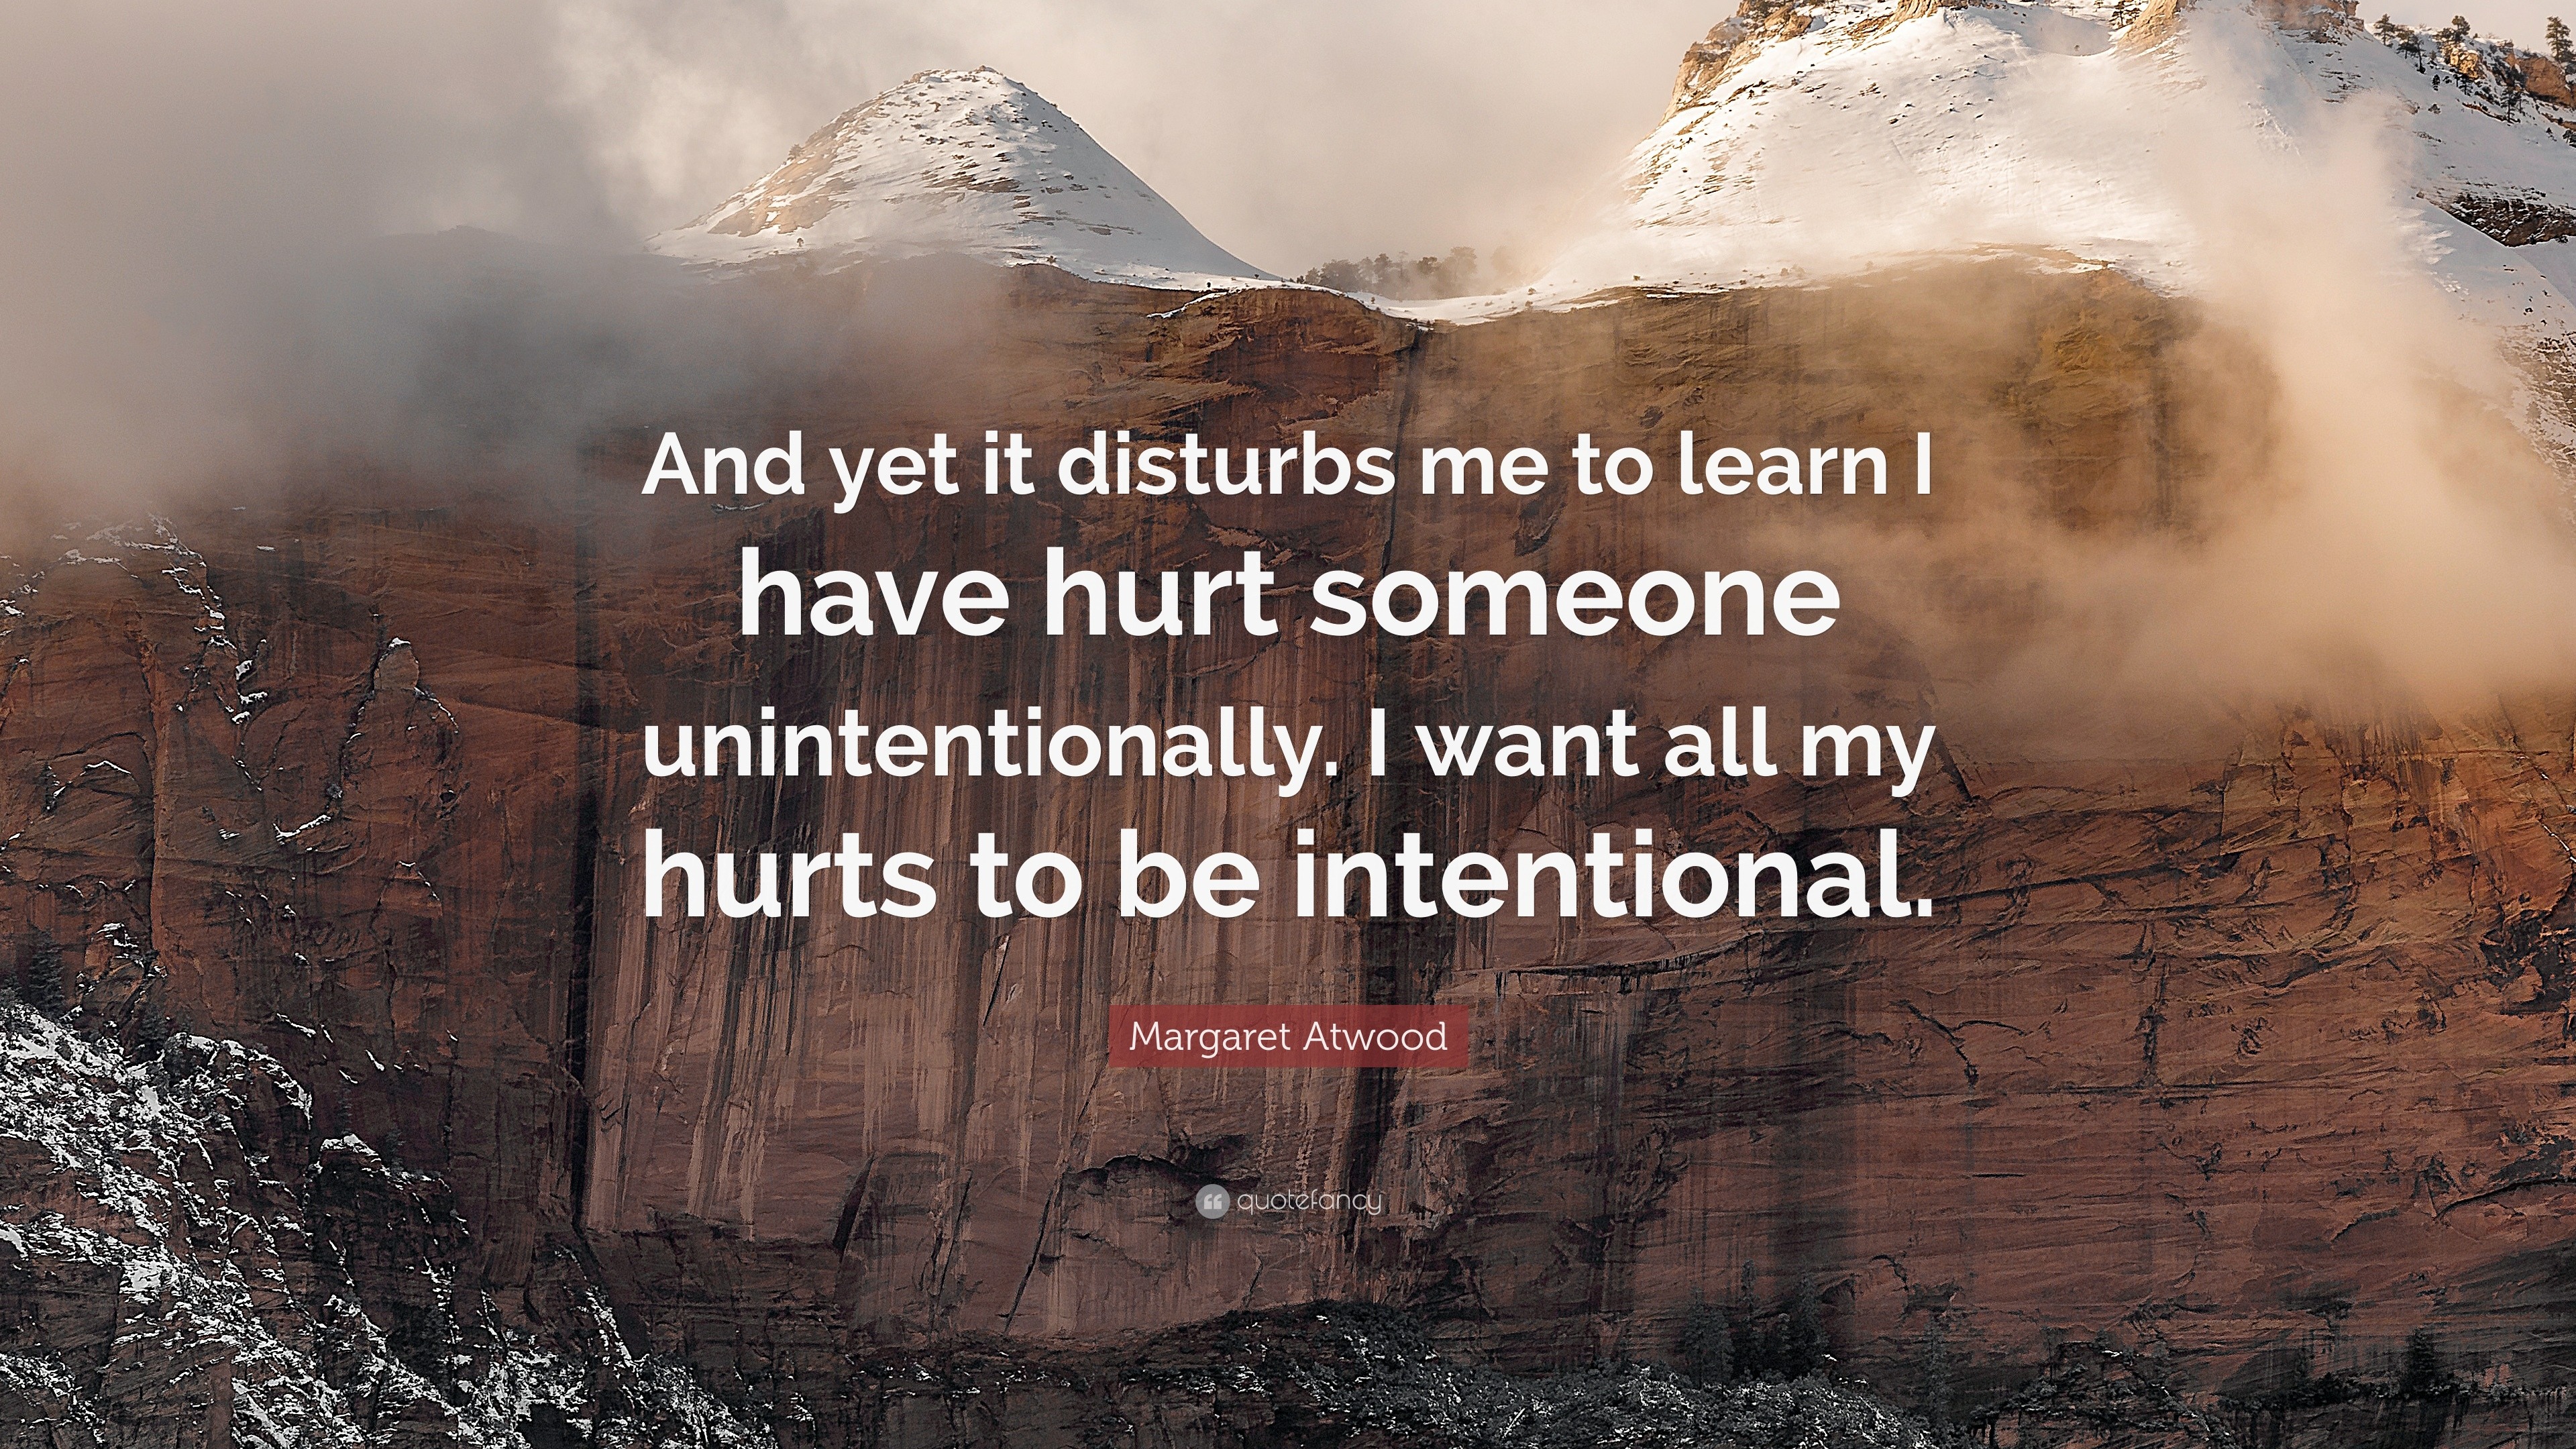 Margaret Atwood Quote “And yet it disturbs me to learn I have hurt someone